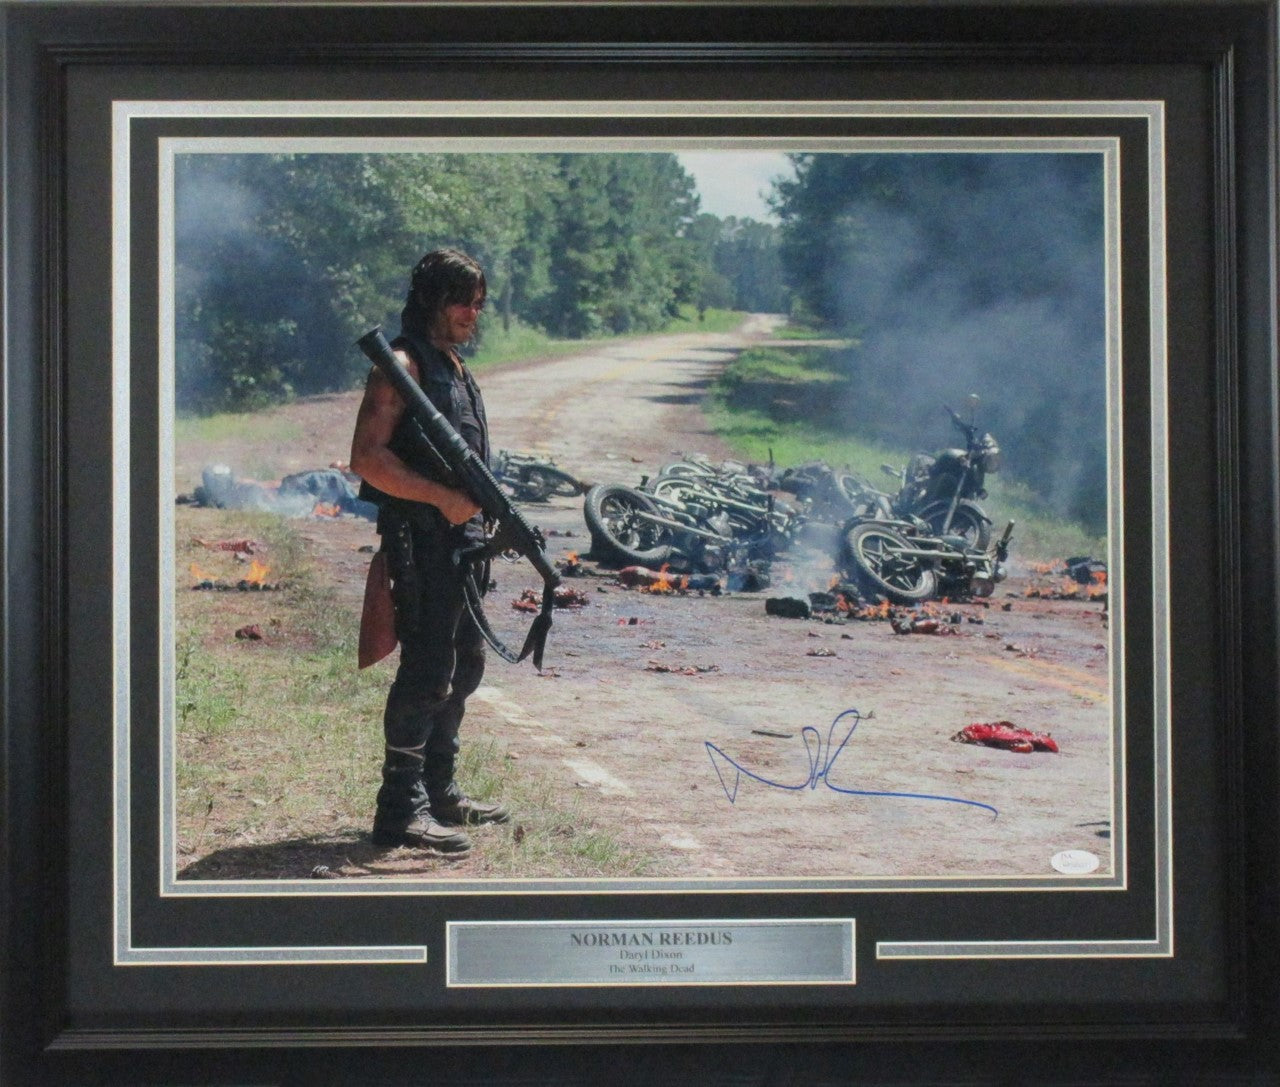 Norman Reedus Walking Dead Autographed 16x20 "Carnage" Photo Framed